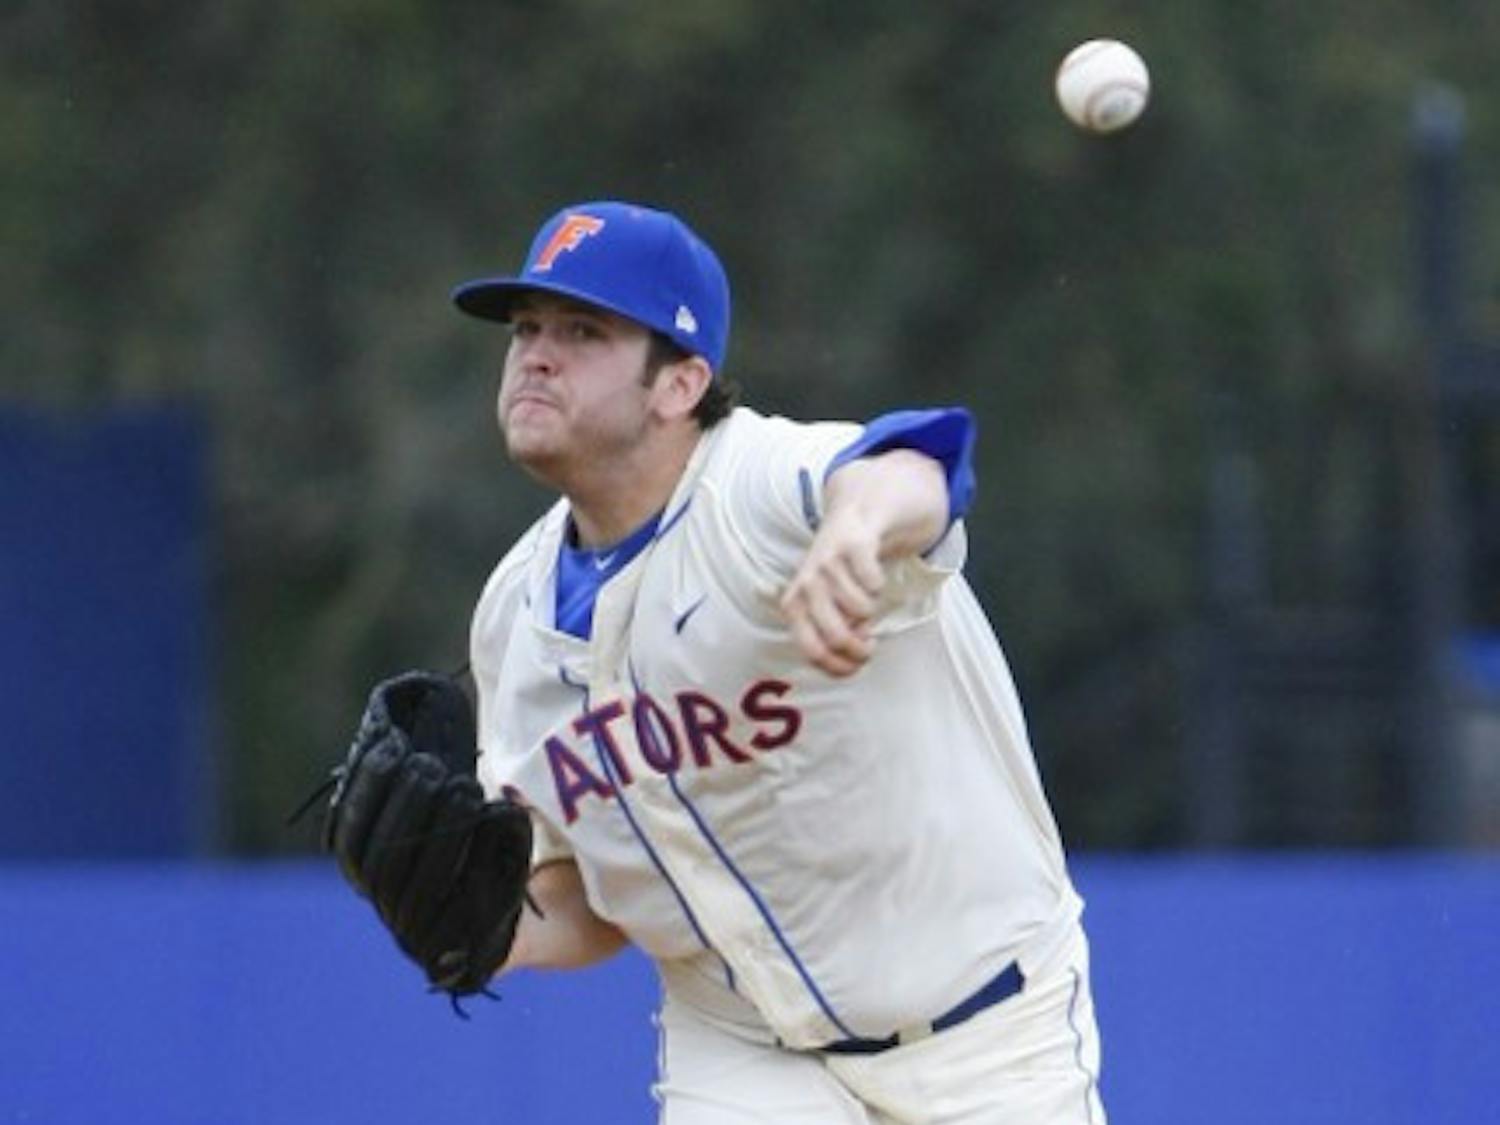 In eight innings of work for Florida this season, left-handed reliever Daniel Gibson has allowed just a single hit and zero earned runs.